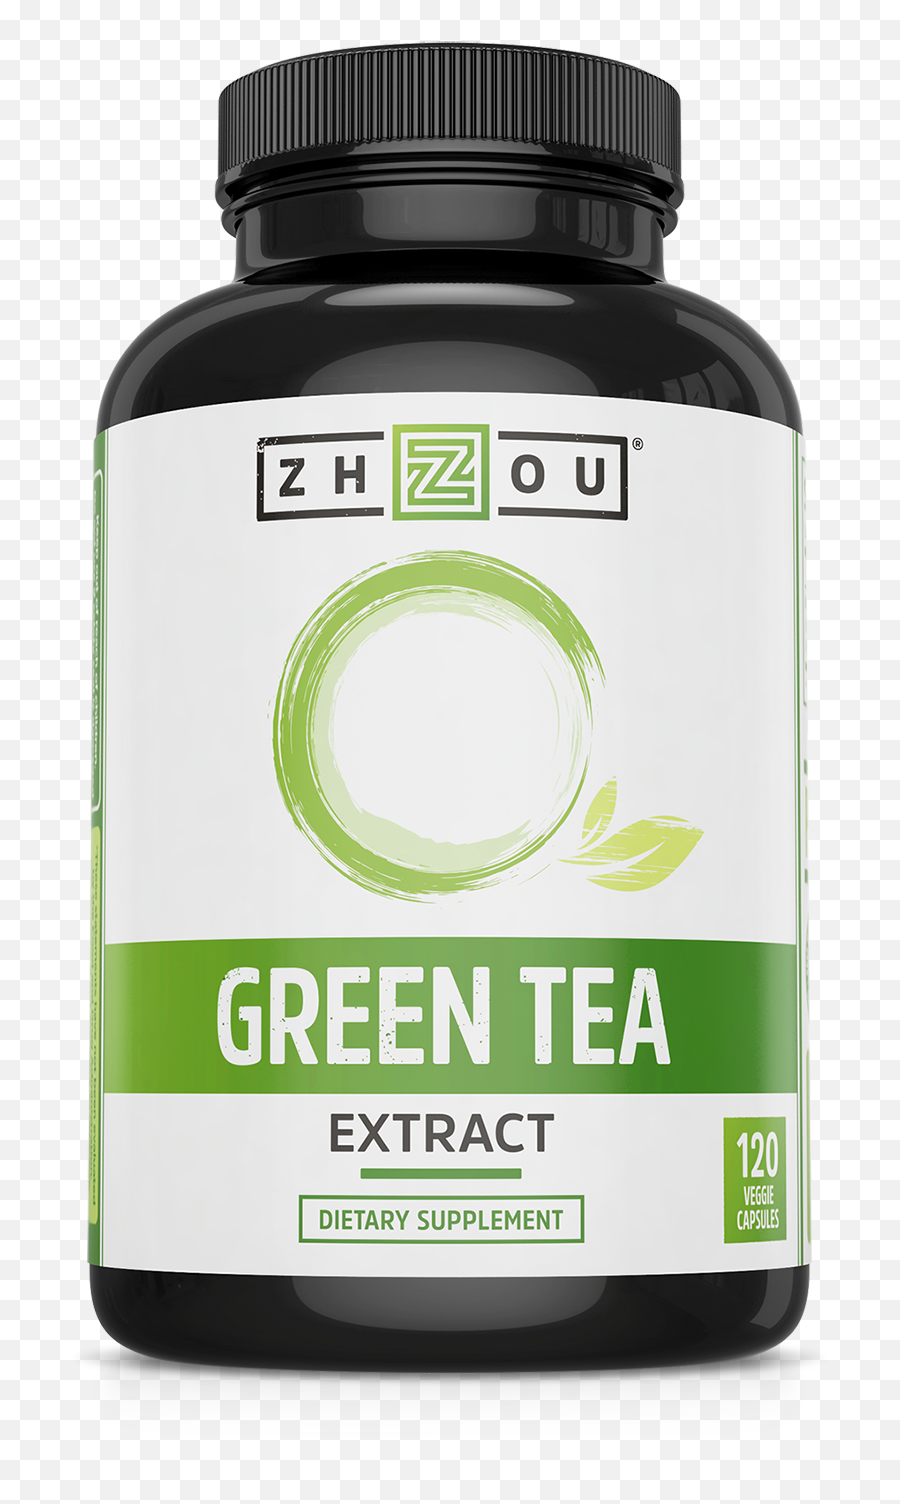 Green Tea Extract For Energy And Emoji,Emotion Classic With Green Tea Extract